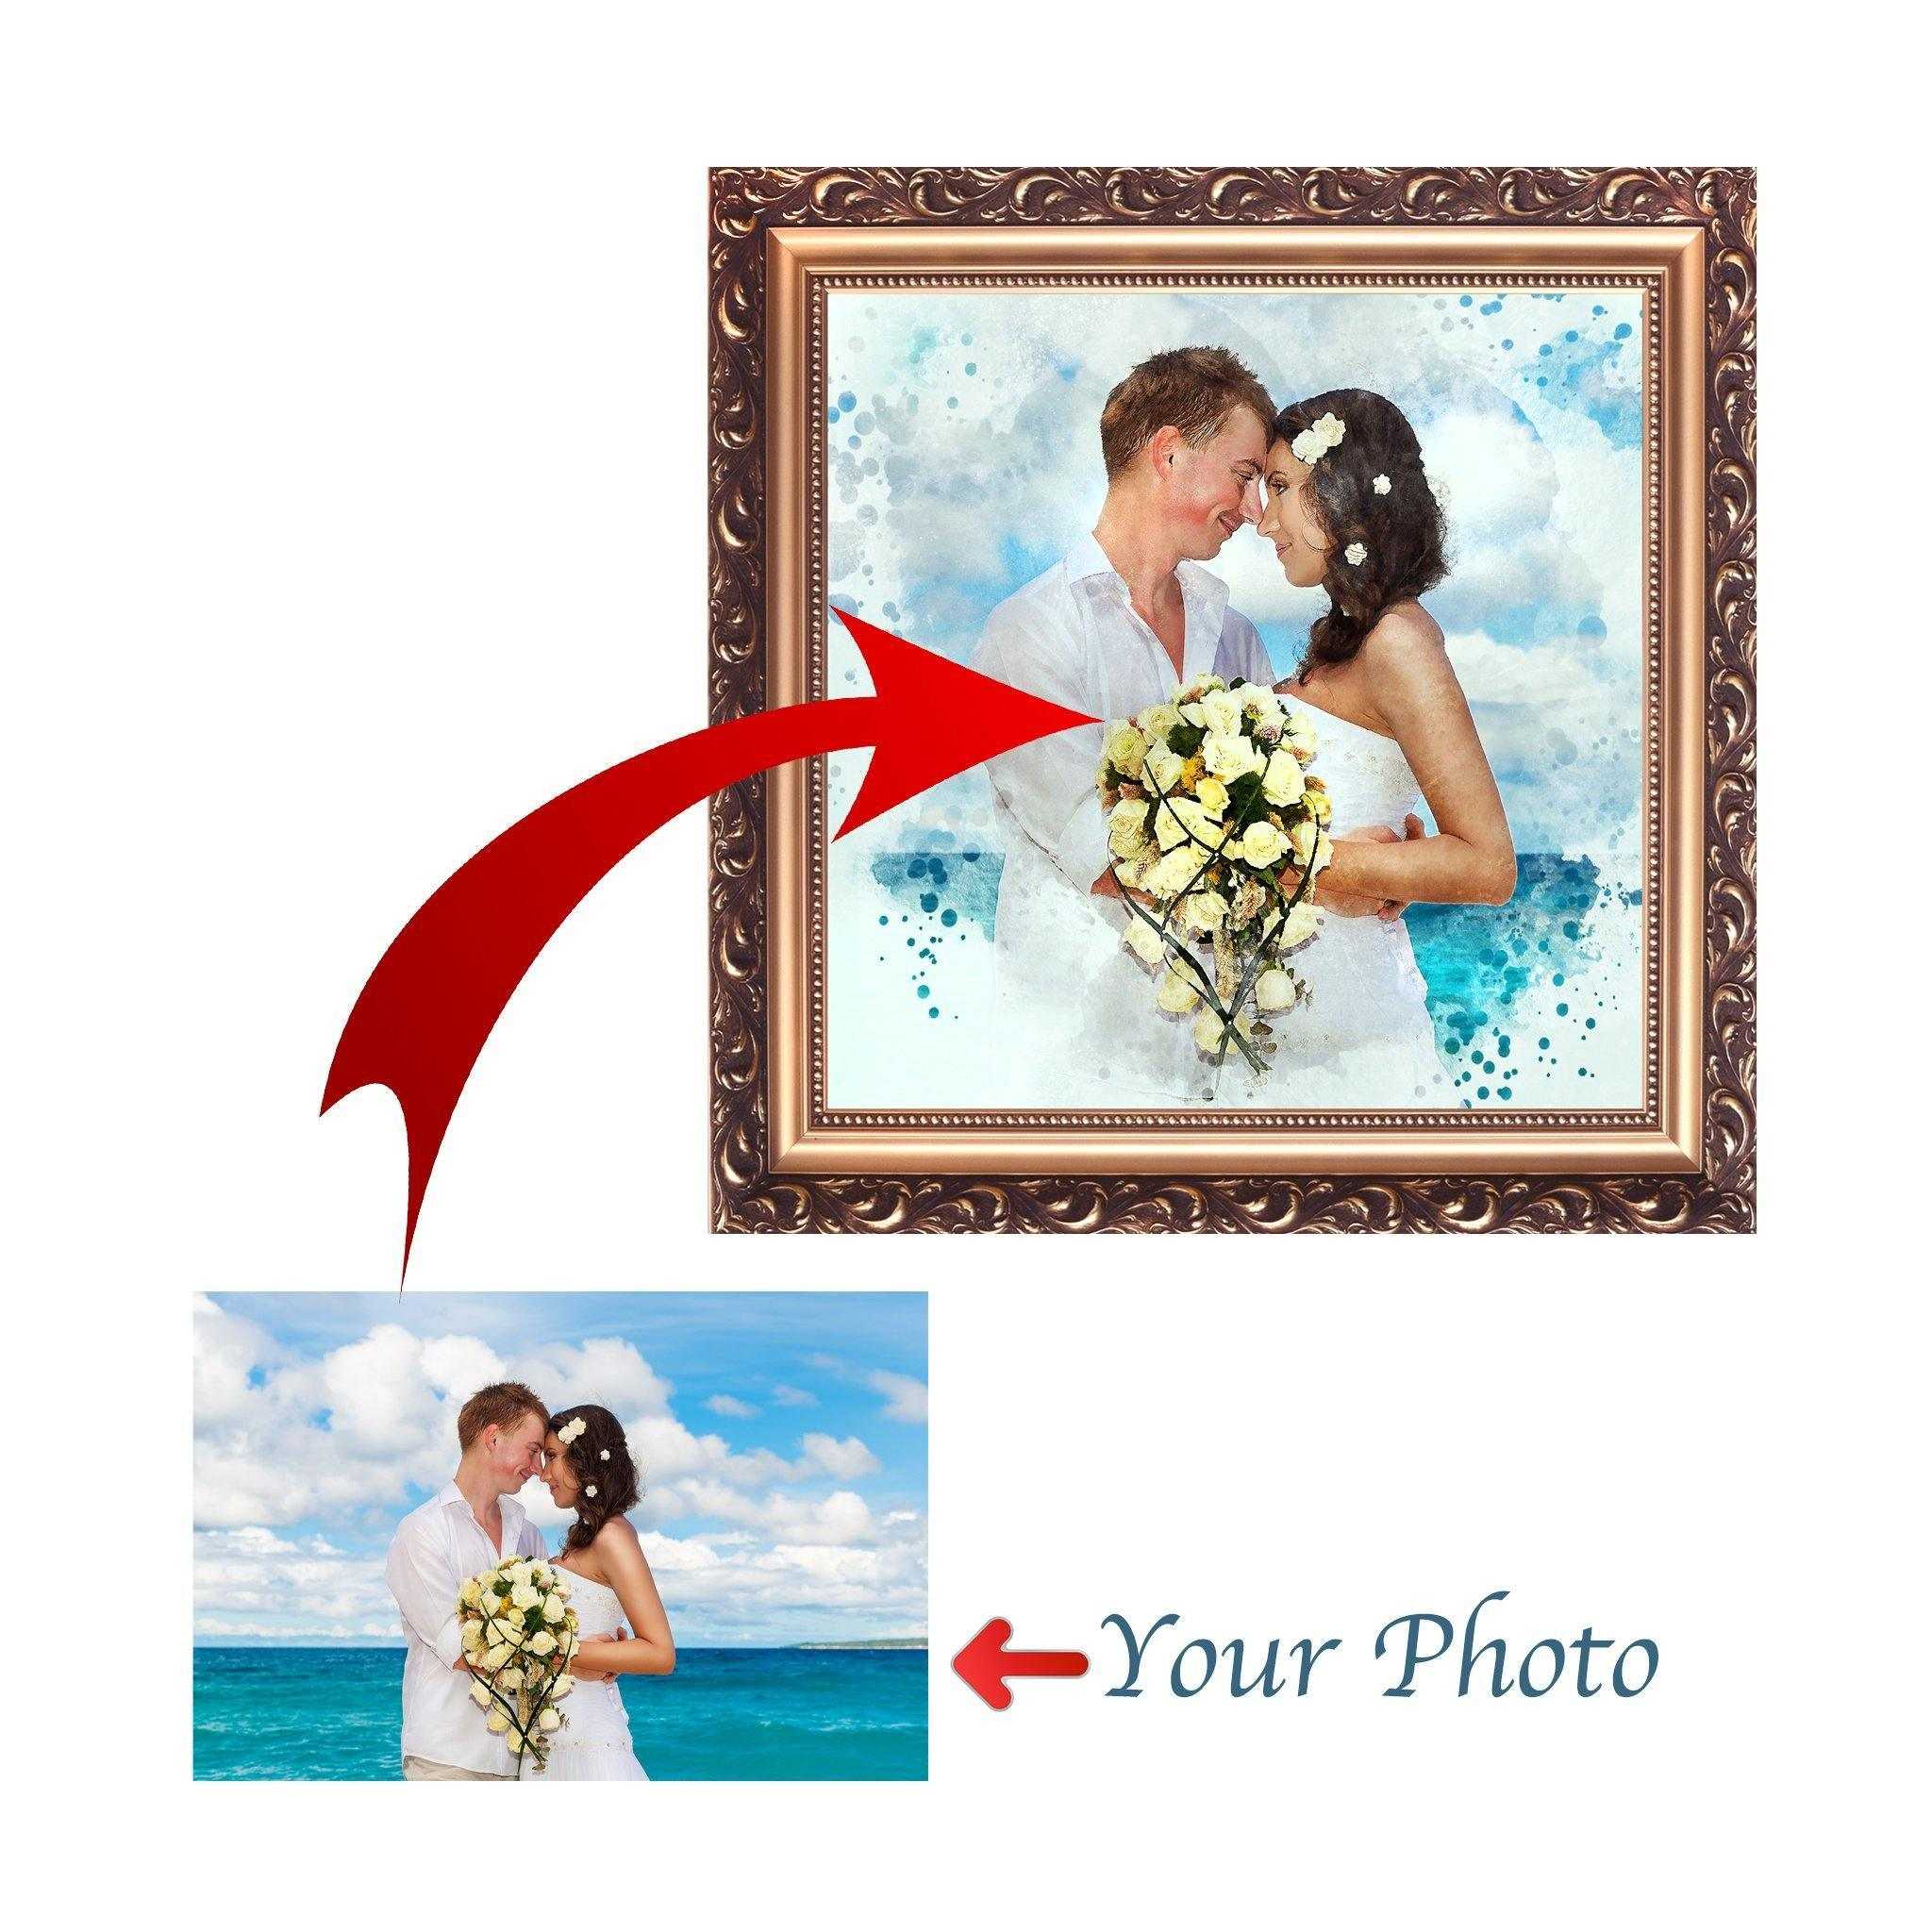 Convert Photo to Painting | Custom Painted Portraits from $59.95 - FromPicToArt